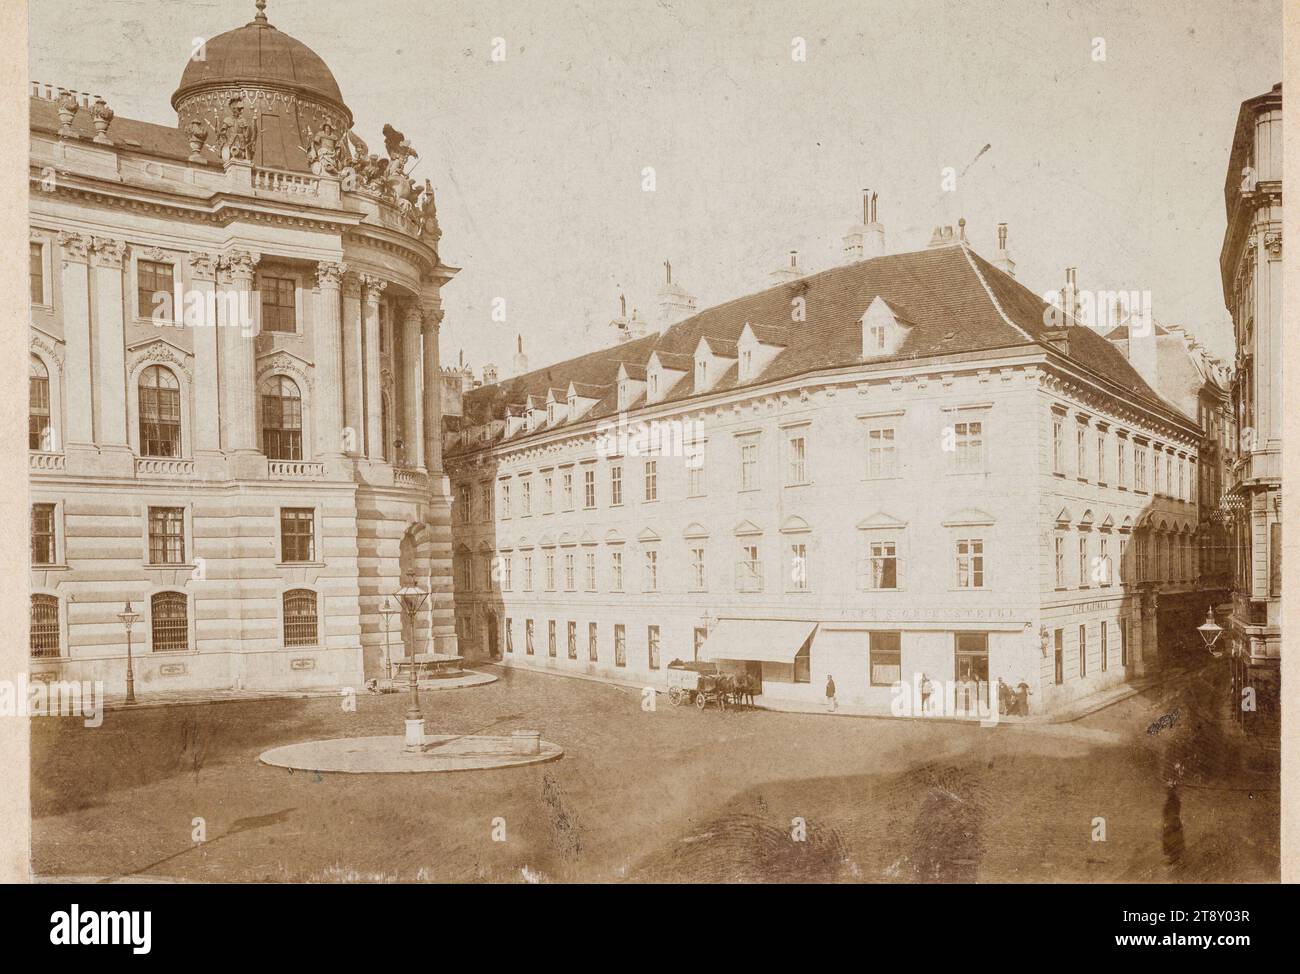 1st, Michaelerplatz 2 - Herbersteinpalais - Café Griensteidl, Unknown, Photographer, Date before 1894, supporting cardboard, glossy collodion paper, image size 11, 5×15, 9 cm, supporting cardboard 12, 8×17, 8 cm, Cafés, Vanished Sites and Structures, Architecture, 1st District: Inner city, palais, palace, castle, Michaelerplatz, The Vienna Collection Stock Photo